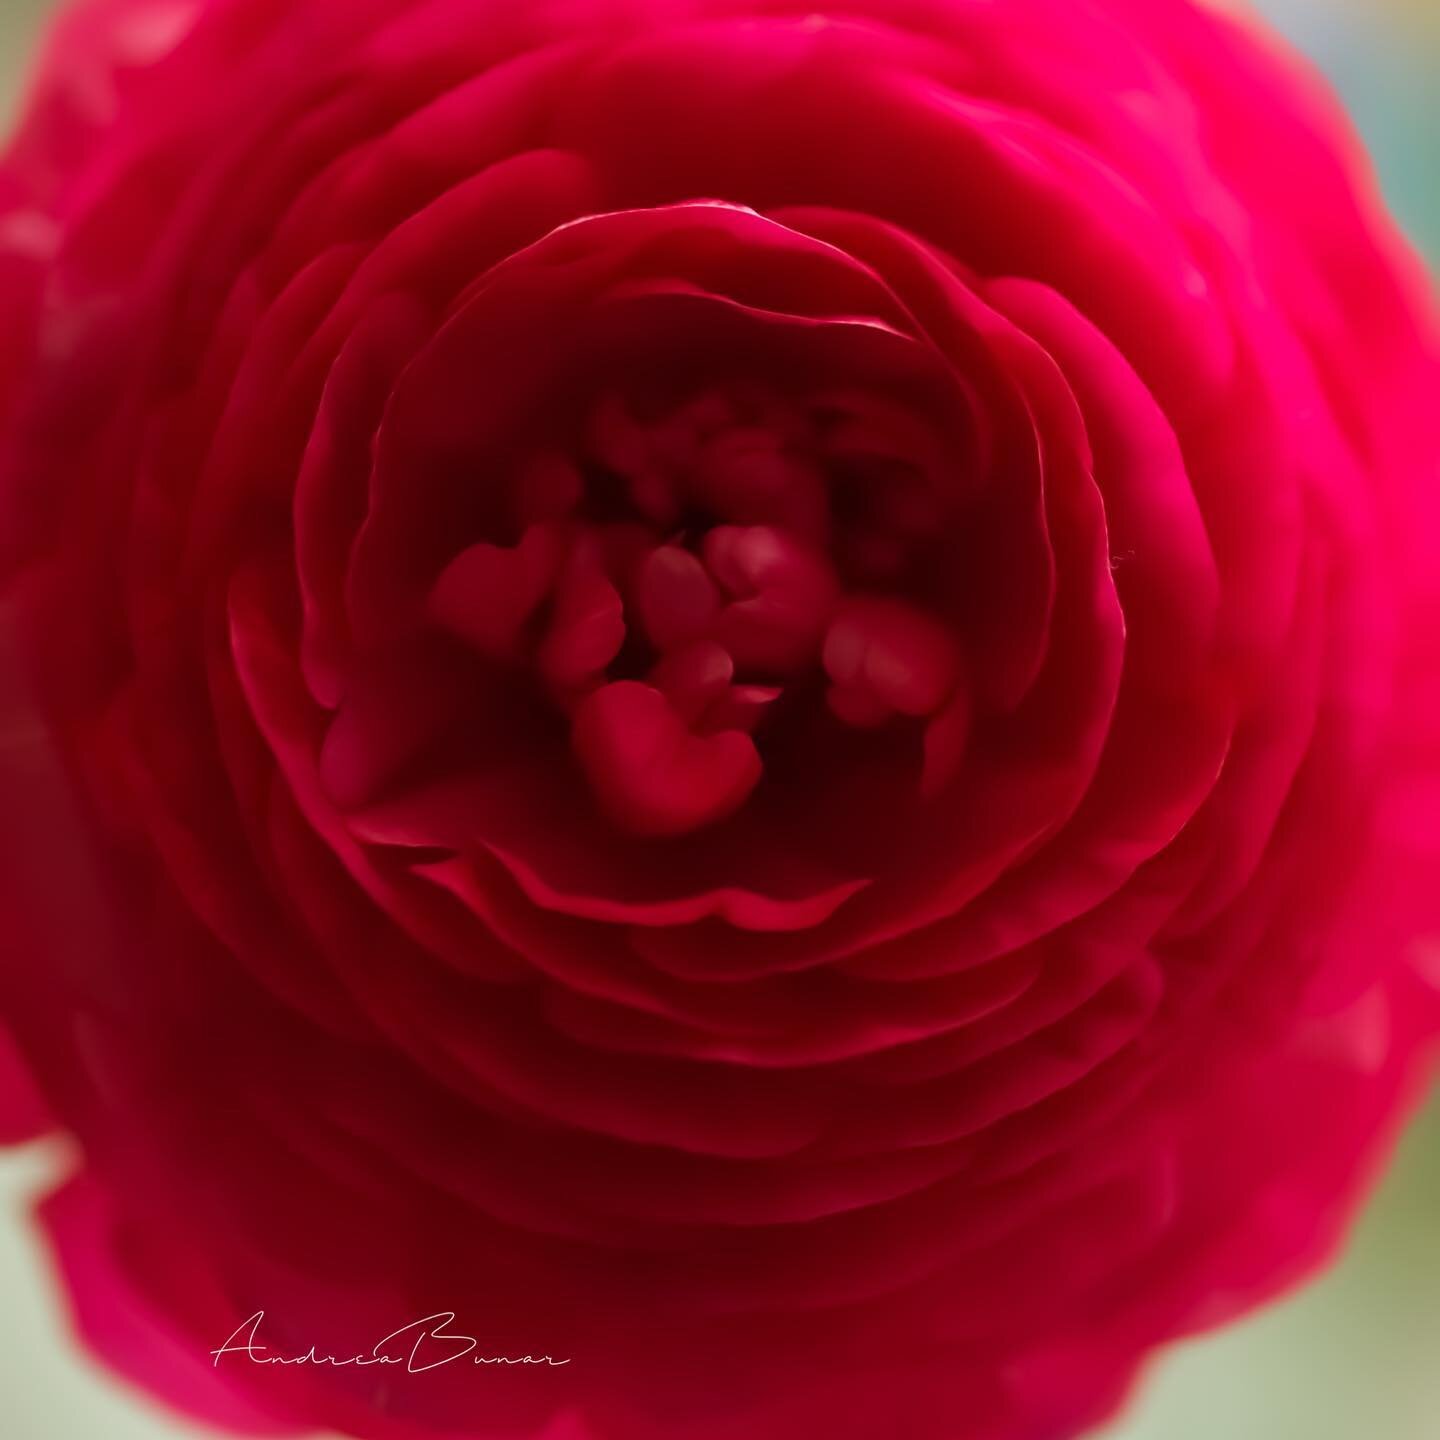 &ldquo;Always listen to your heart, because even though it's on your left side, it's always right. ~Nicholas Sparks

#spectaculum_magazine 
#capecodlife #ranunculus #capecod #flowerstagram #bestoftheusa_macro #bestoftheusa_flowers #canonmacro #bns_fl